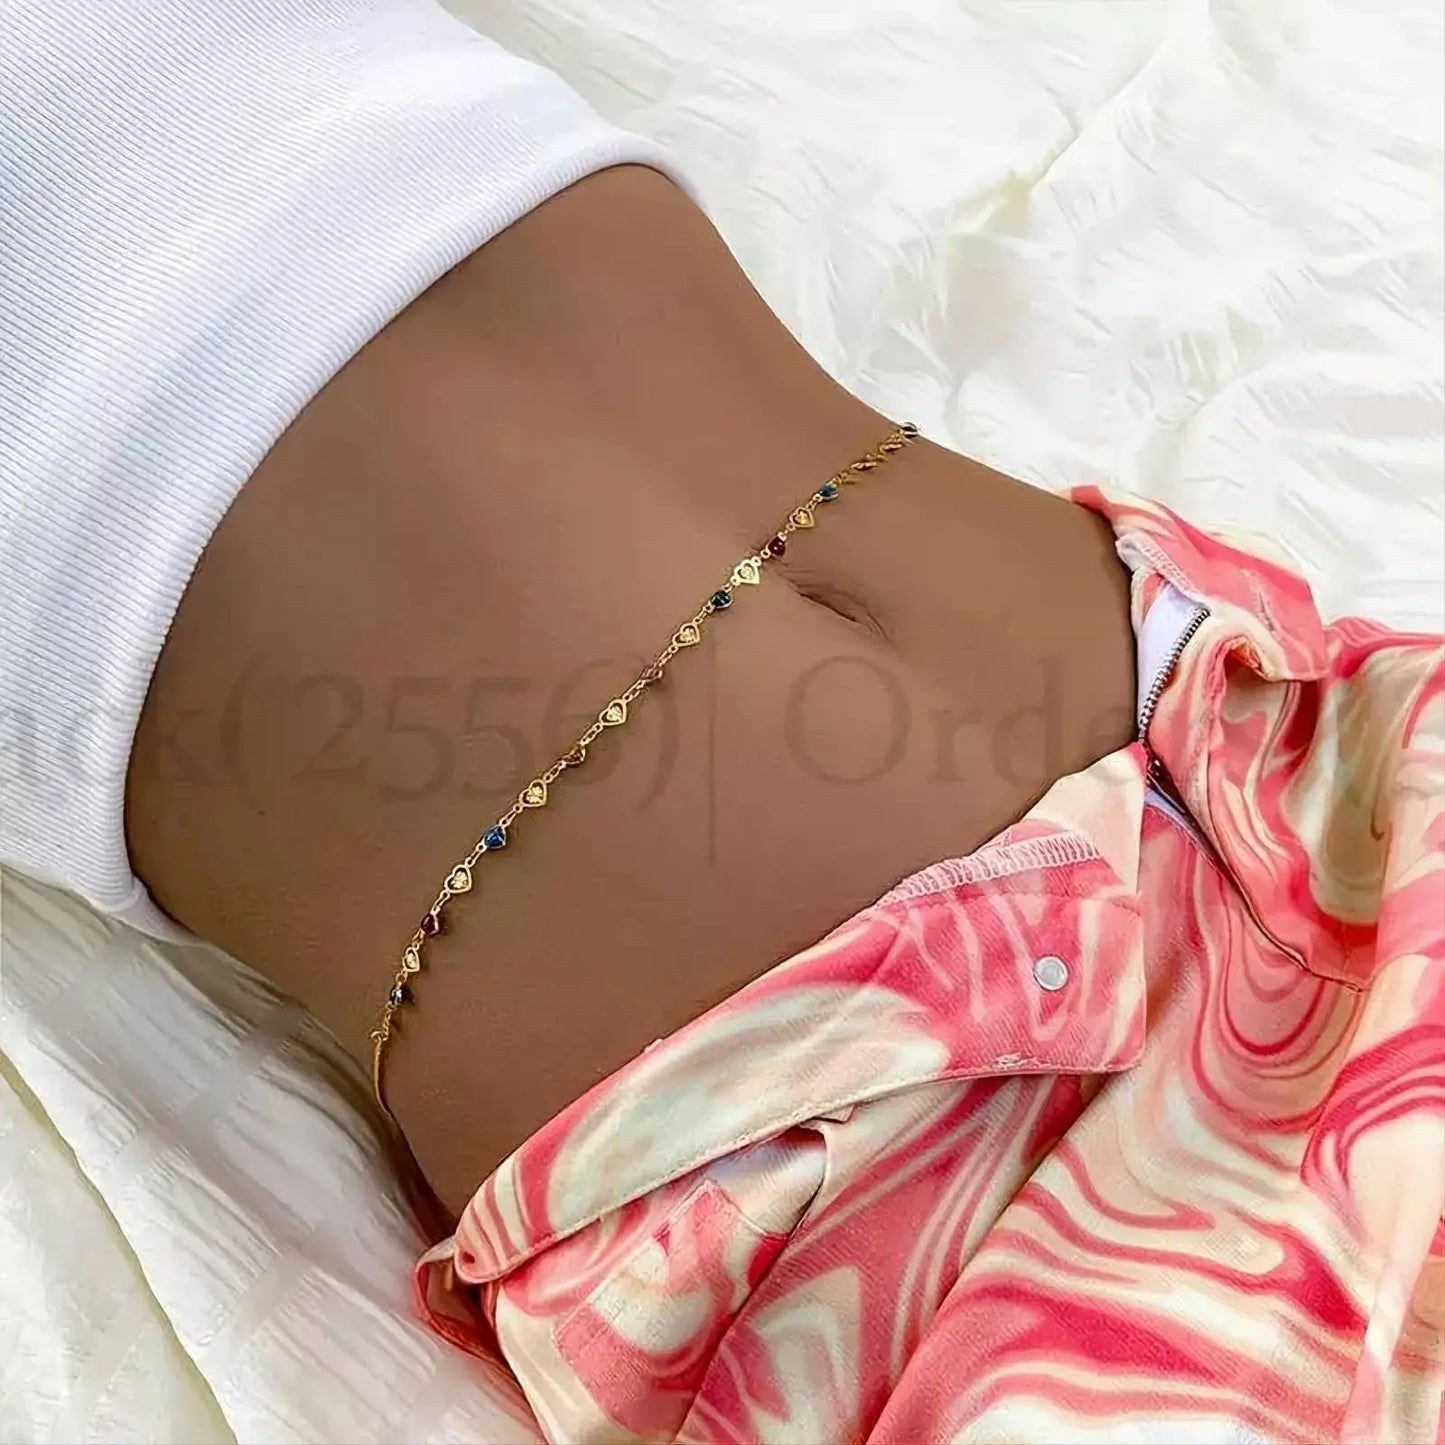 Gold or Silver Sexy Colorful Hearts Aesthetic Belly Chain Waist Body Chain JettsJewelers